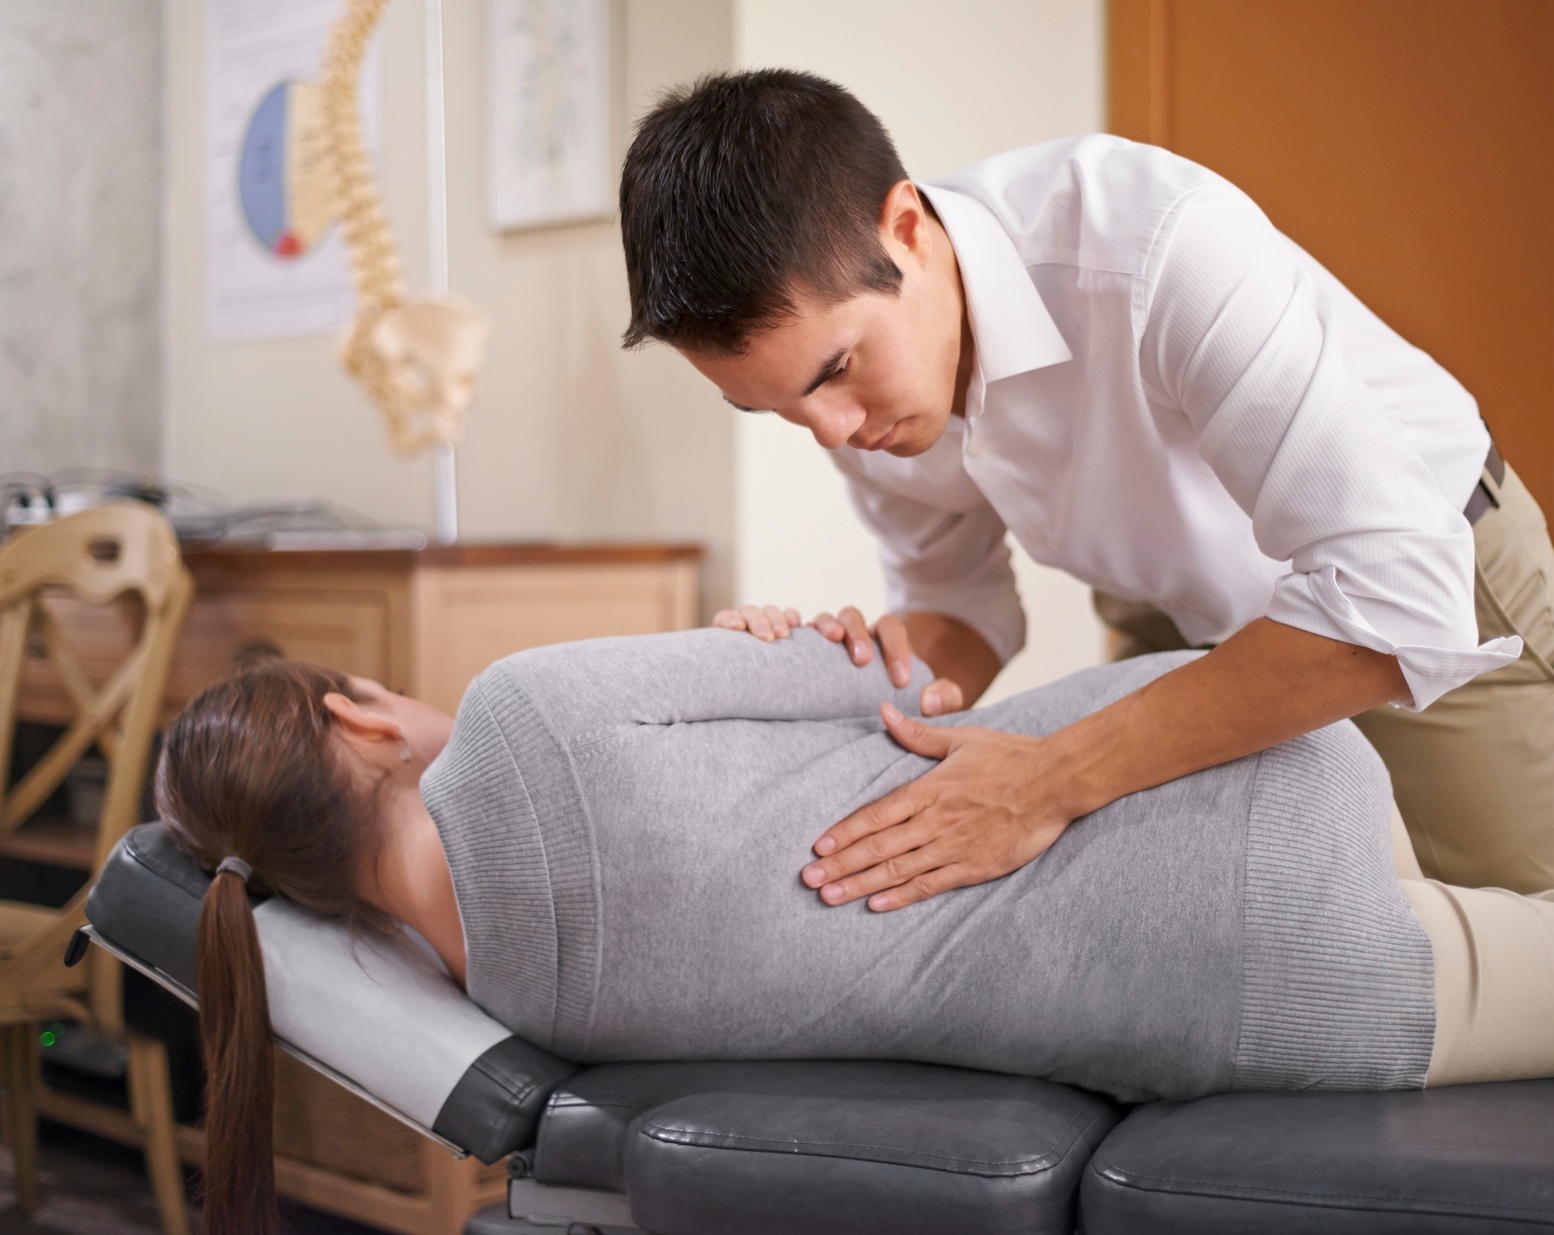 What Should You Expect When You Visit A Chiropractor?